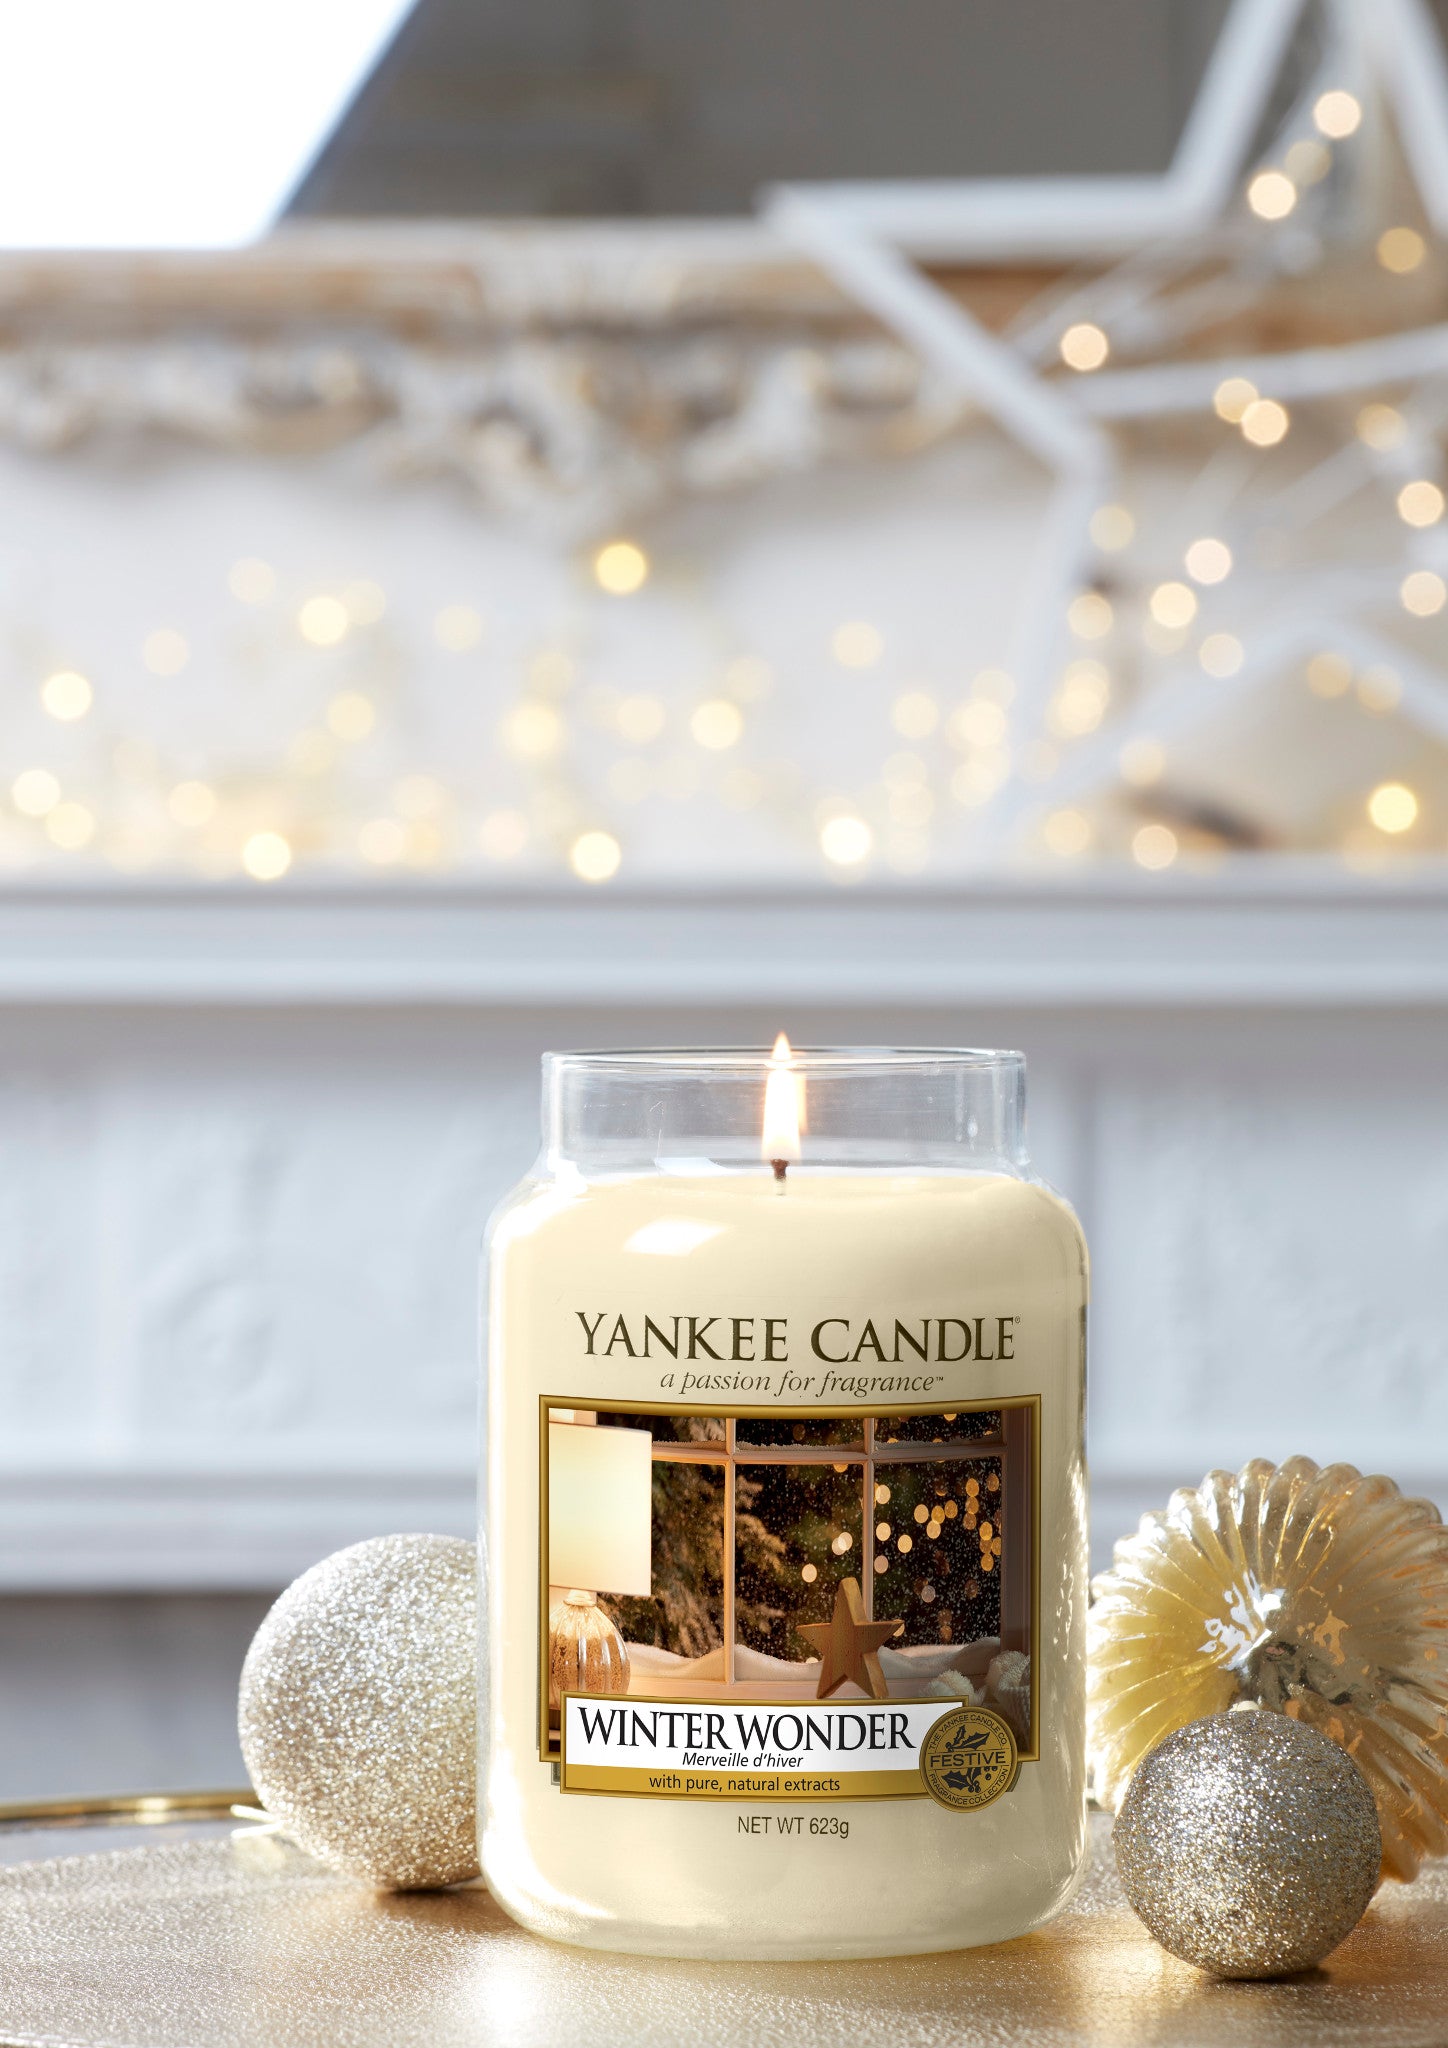 WINTER WONDER -Yankee Candle- Giara Piccola – Candle With Care